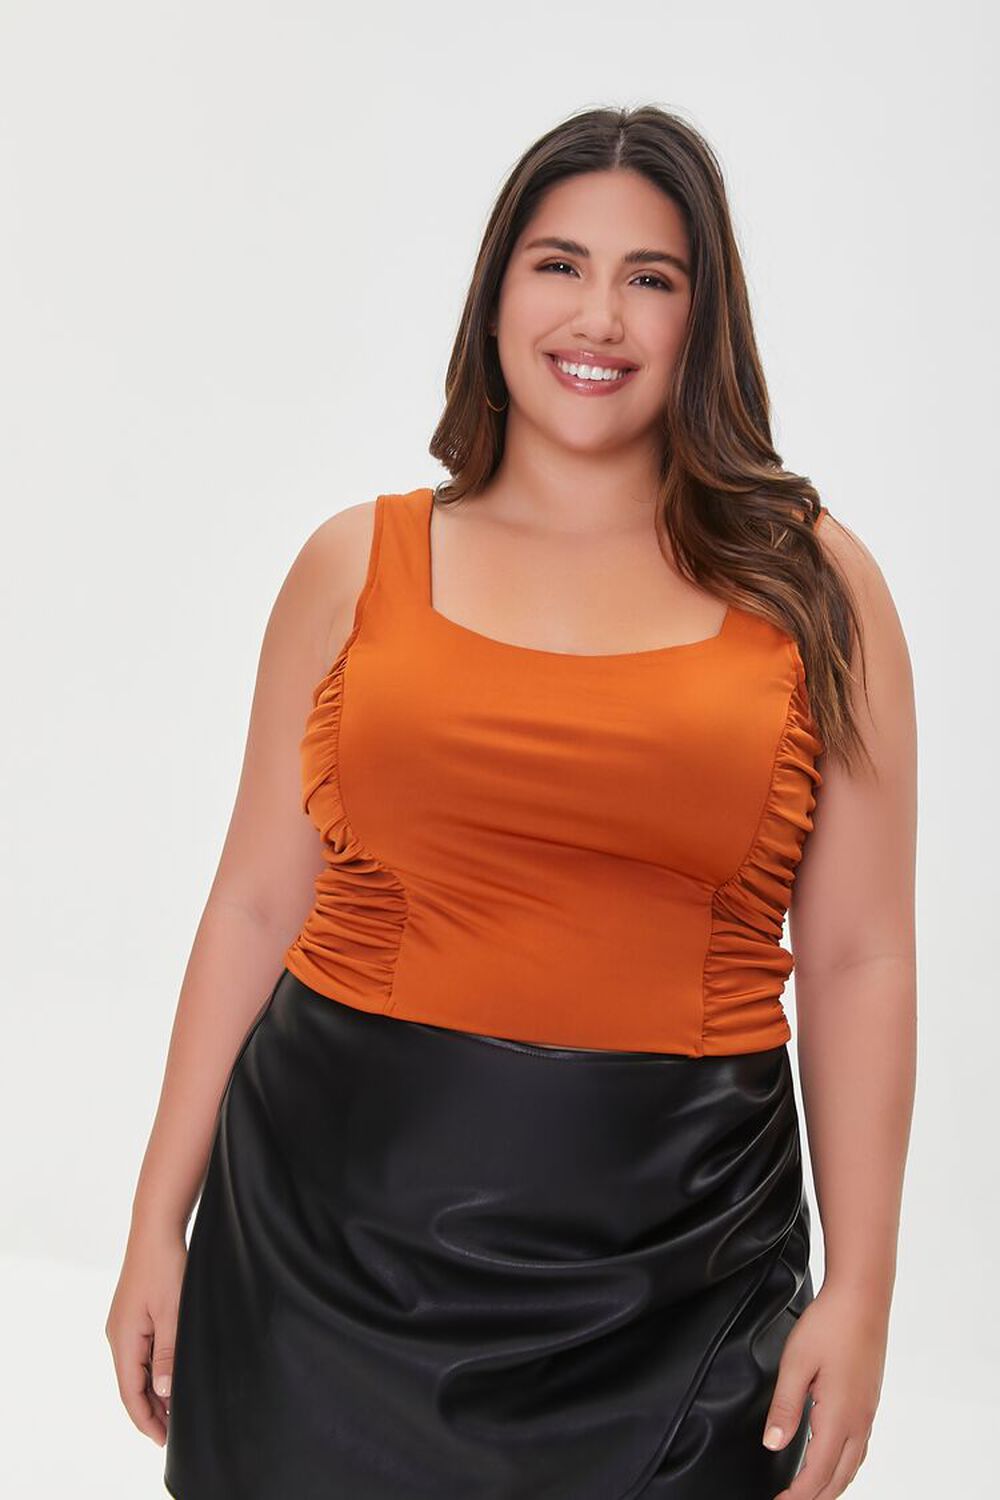 CHESTNUT Plus Size Ruched Crop Top, image 1